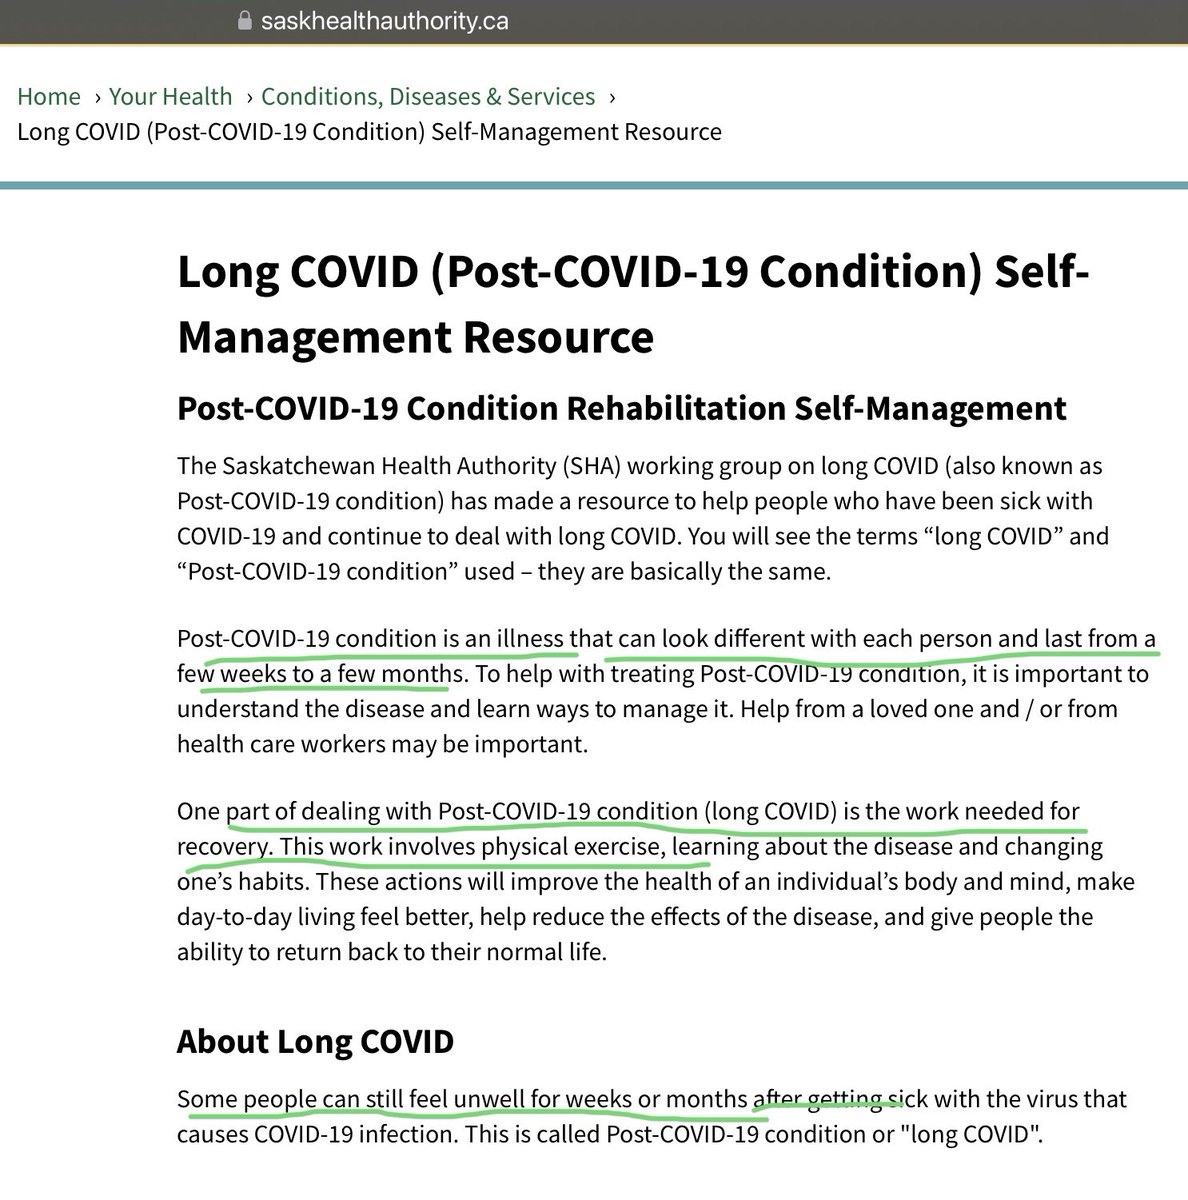 @SaskHealth Long COVID can last more than a few months. NO exercise is NOT a way to treat #longCOVID That makes symptoms worse saskhealthauthority.ca/your-health/co… #skpoli #sked #Saskatchewan #saskhealth #covid19sk